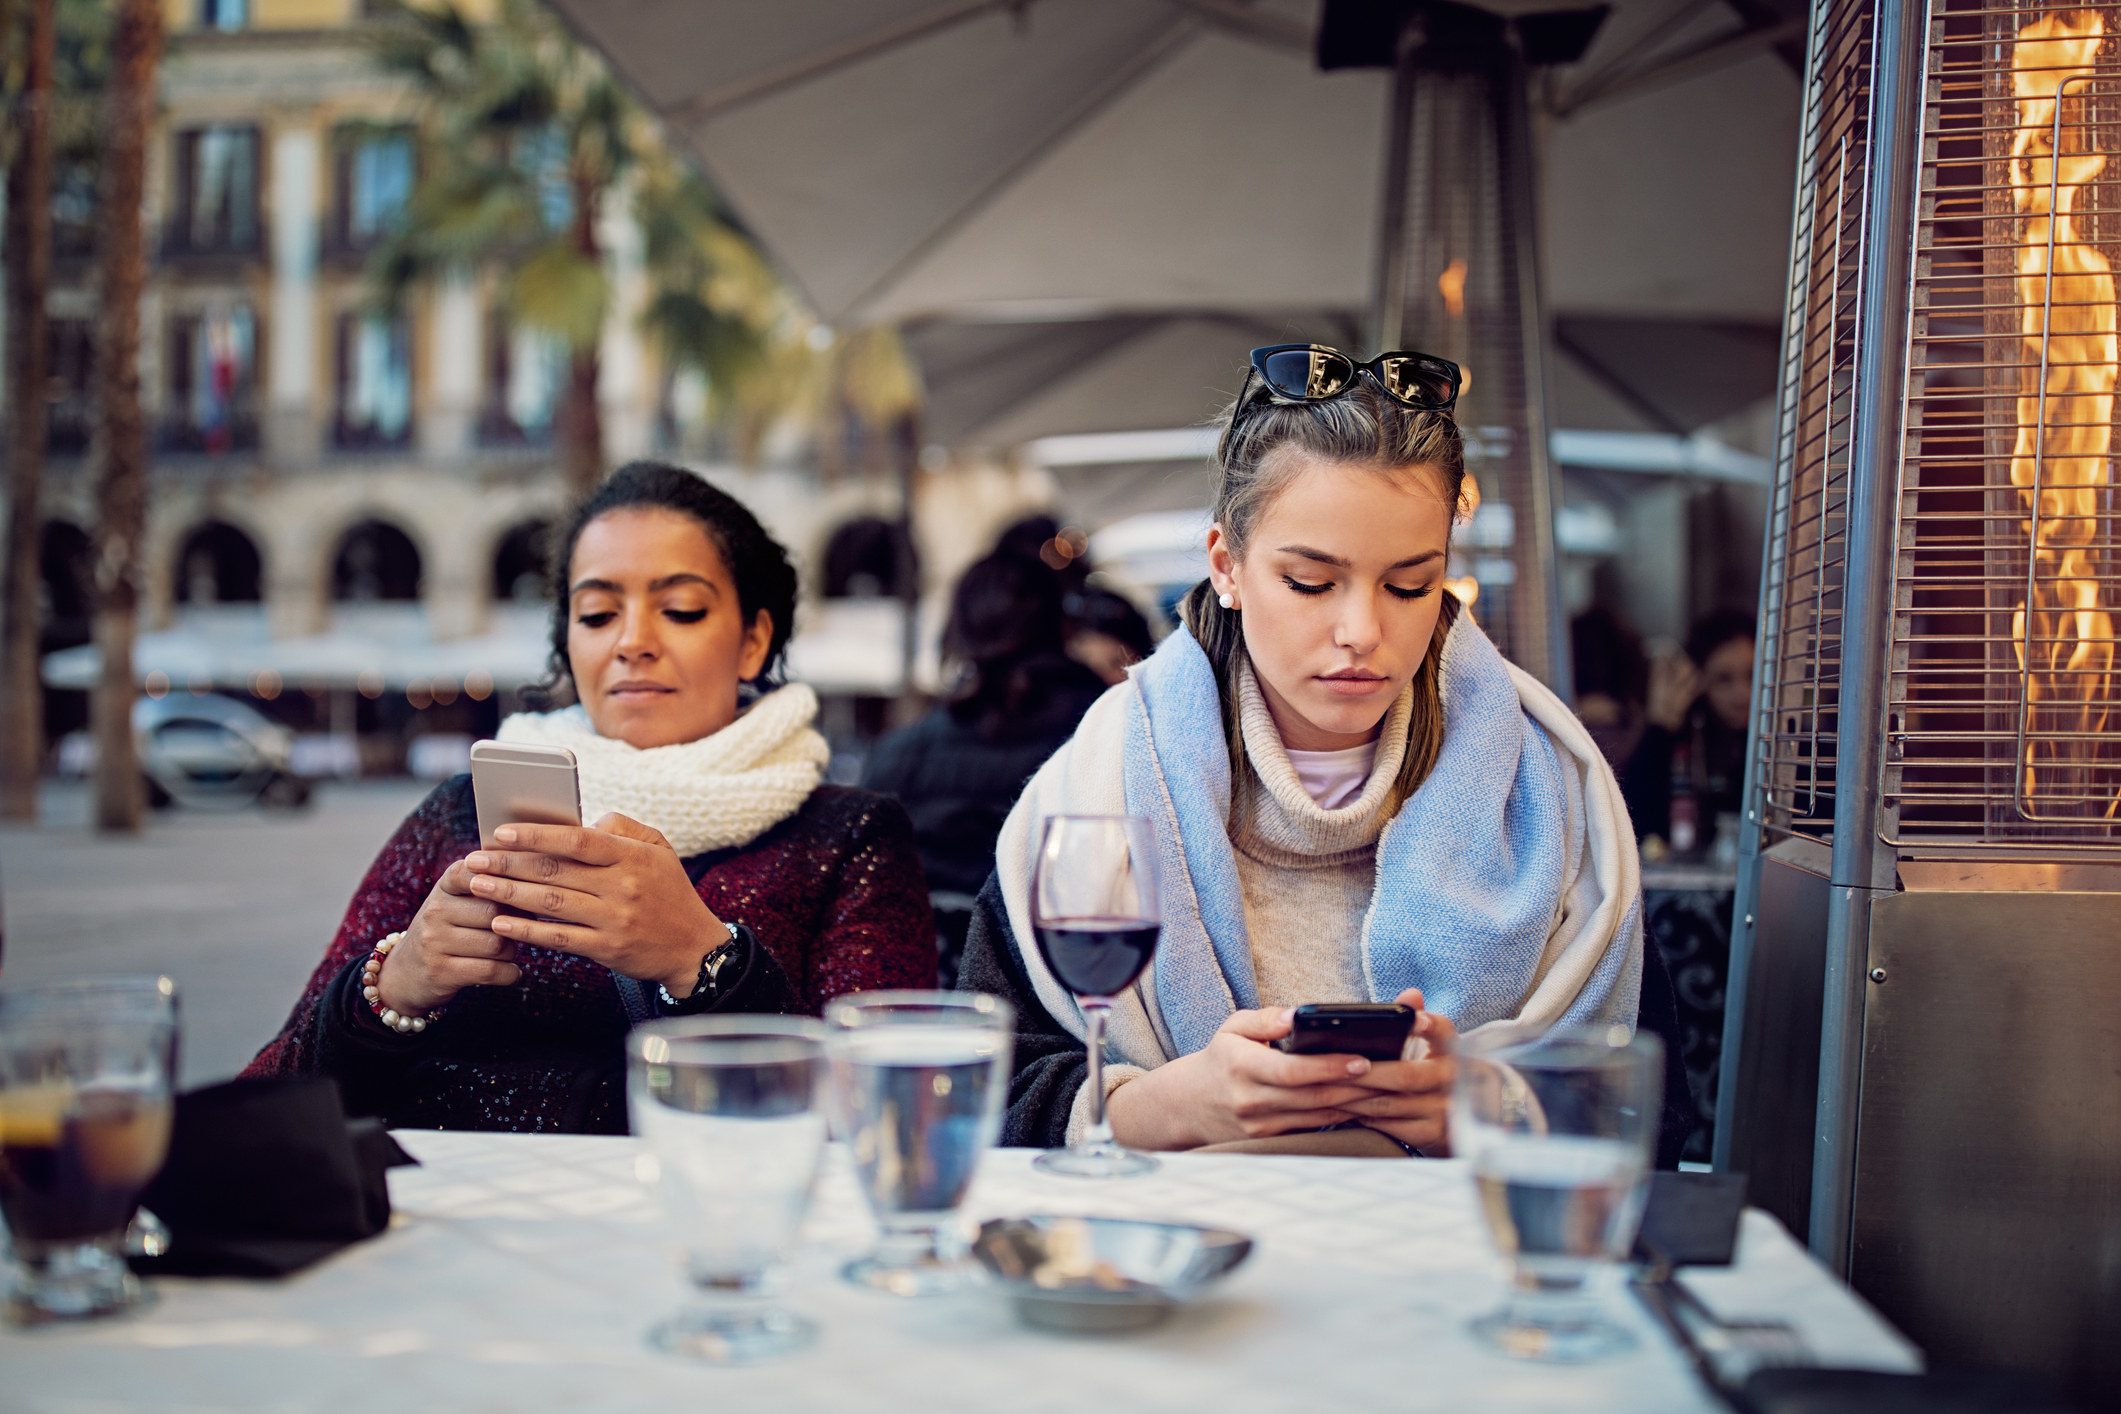 Two women at table texting separately on their phones